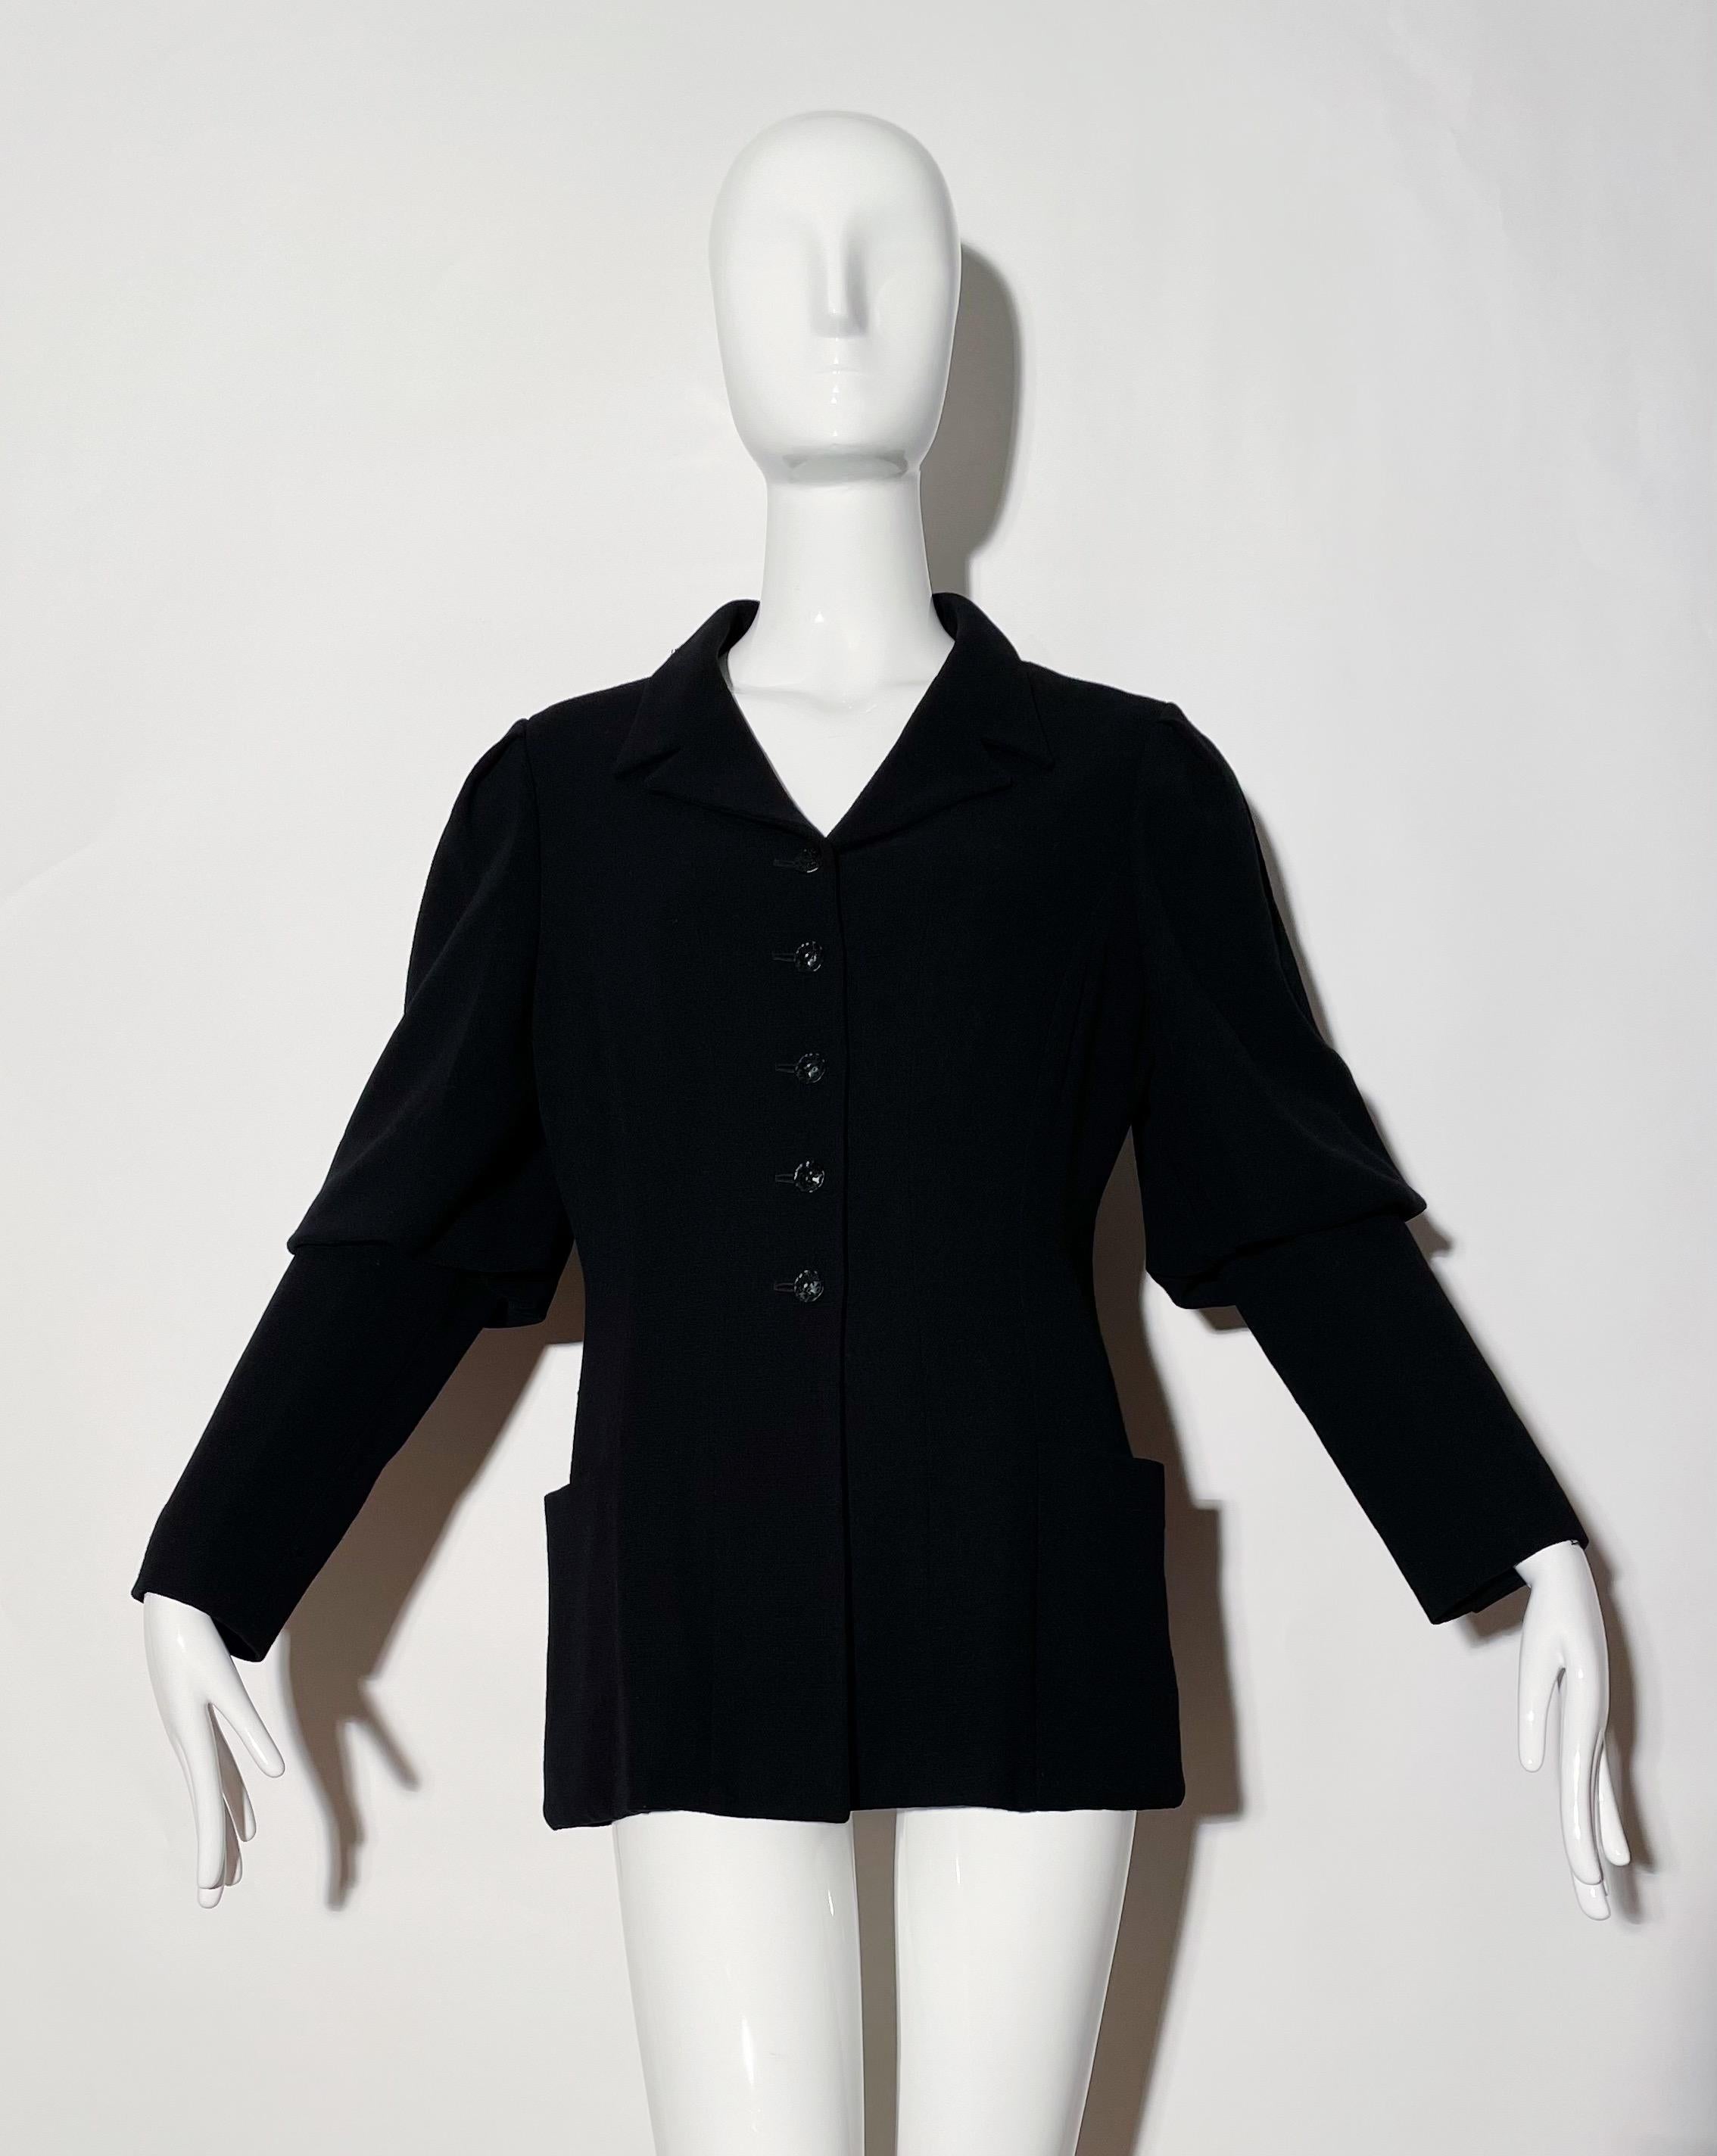 Chloe Black Blazer with Dramatic Sleeves  For Sale 5